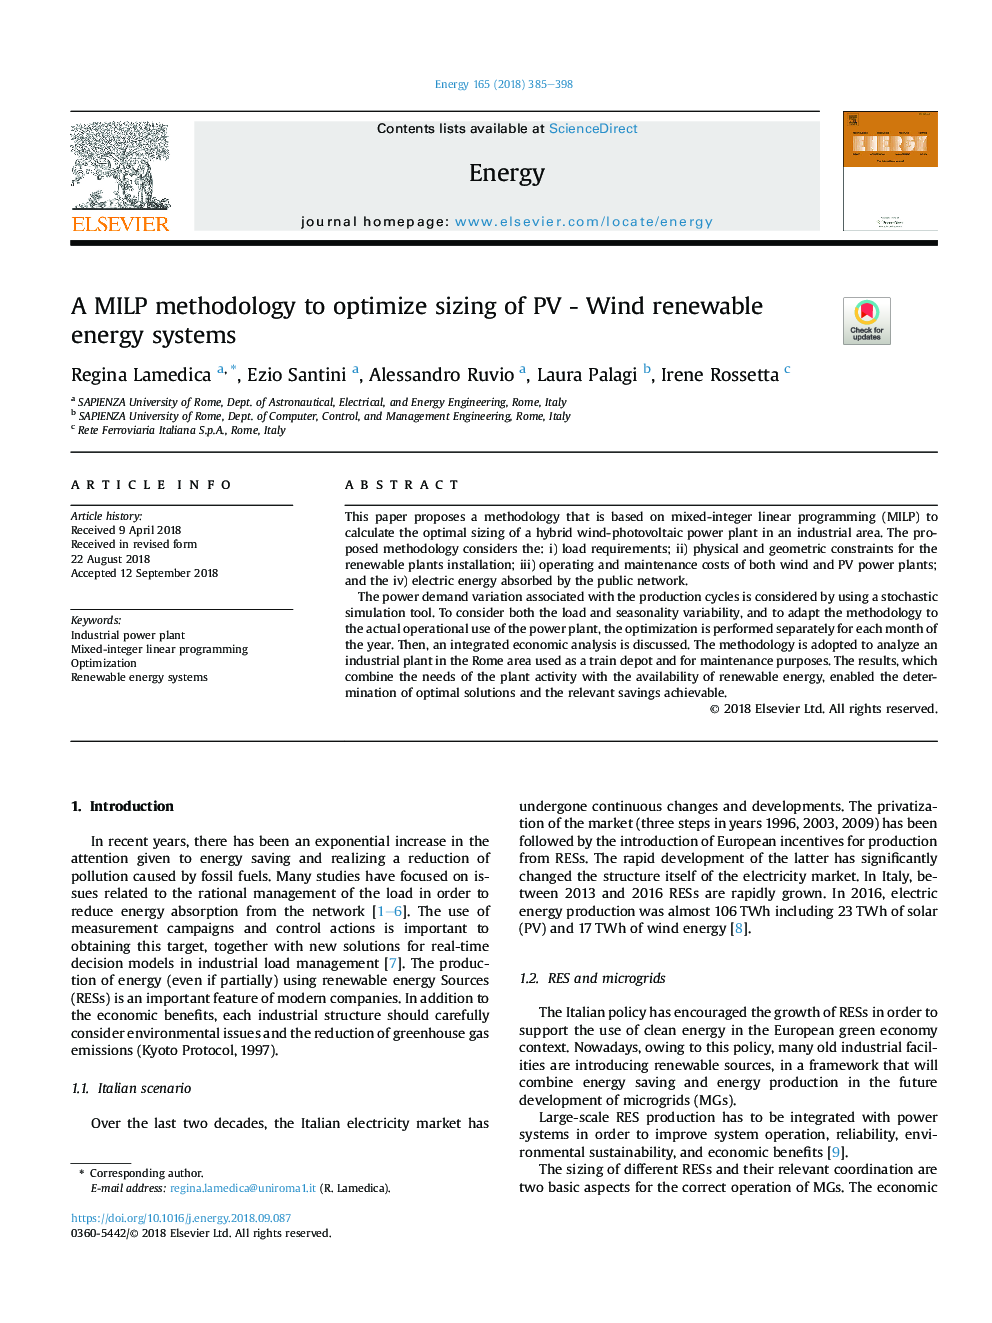 A MILP methodology to optimize sizing of PV - Wind renewable energy systems